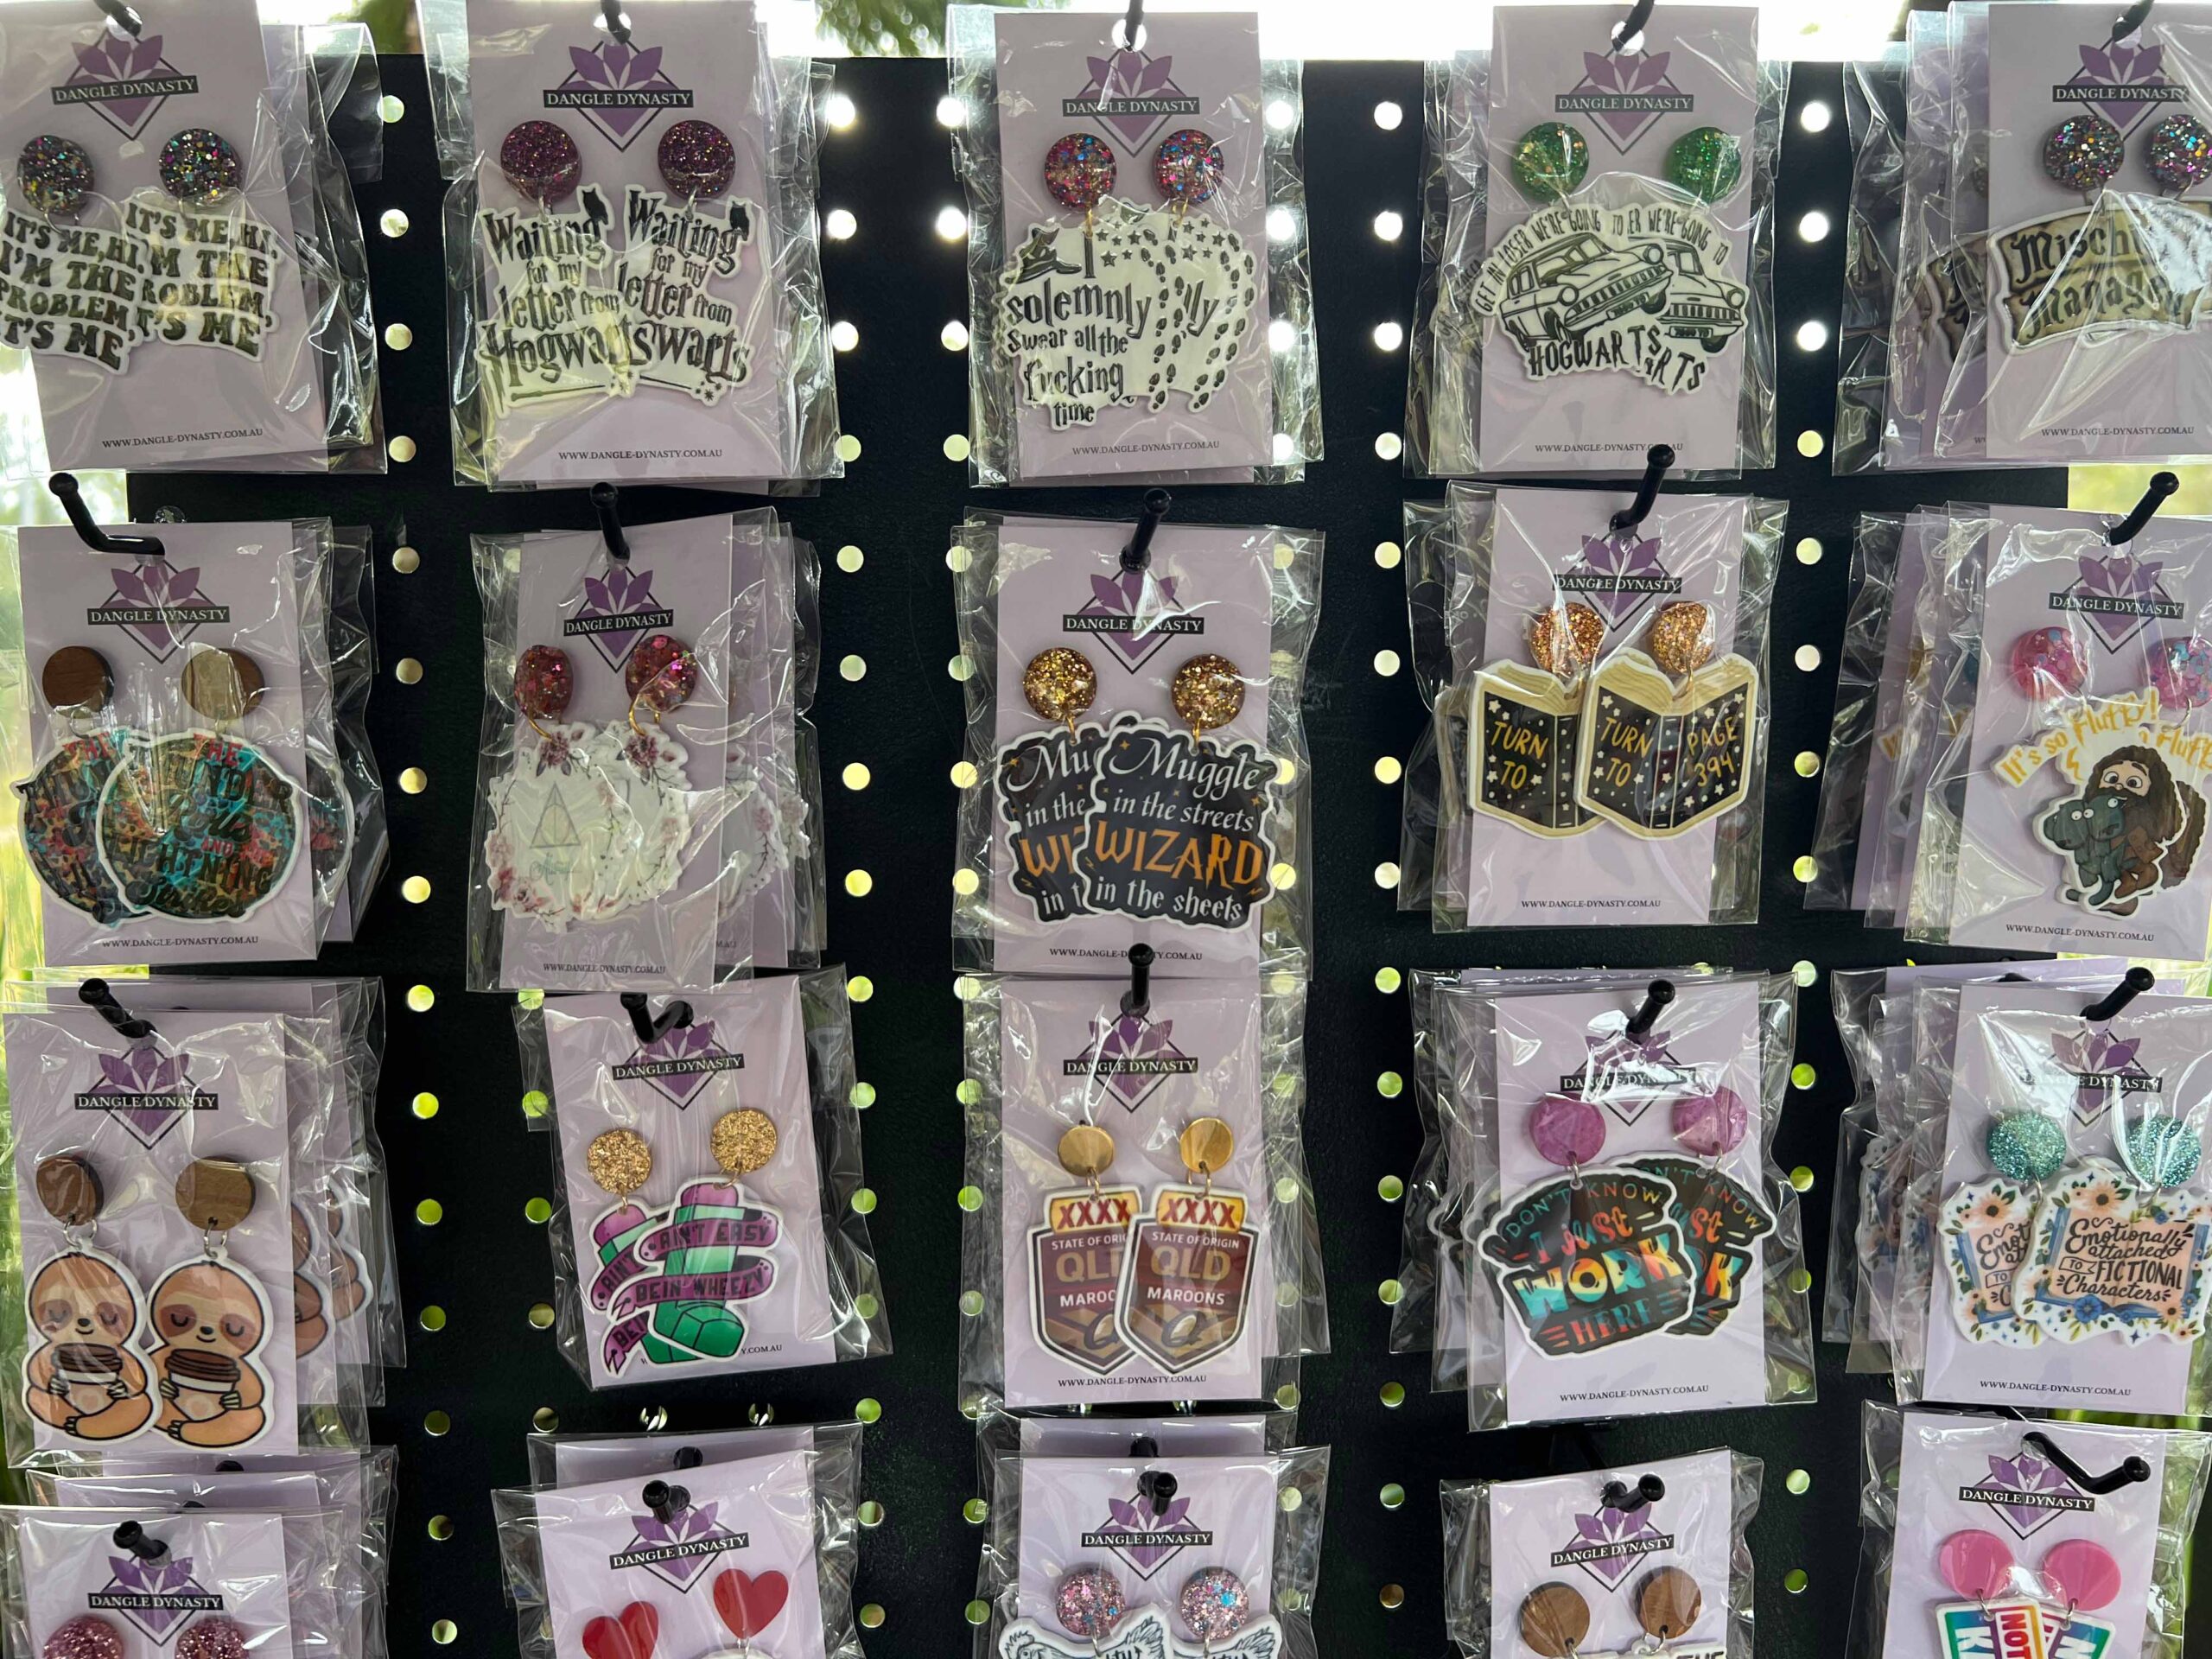 Earrings at the Springfield Markets